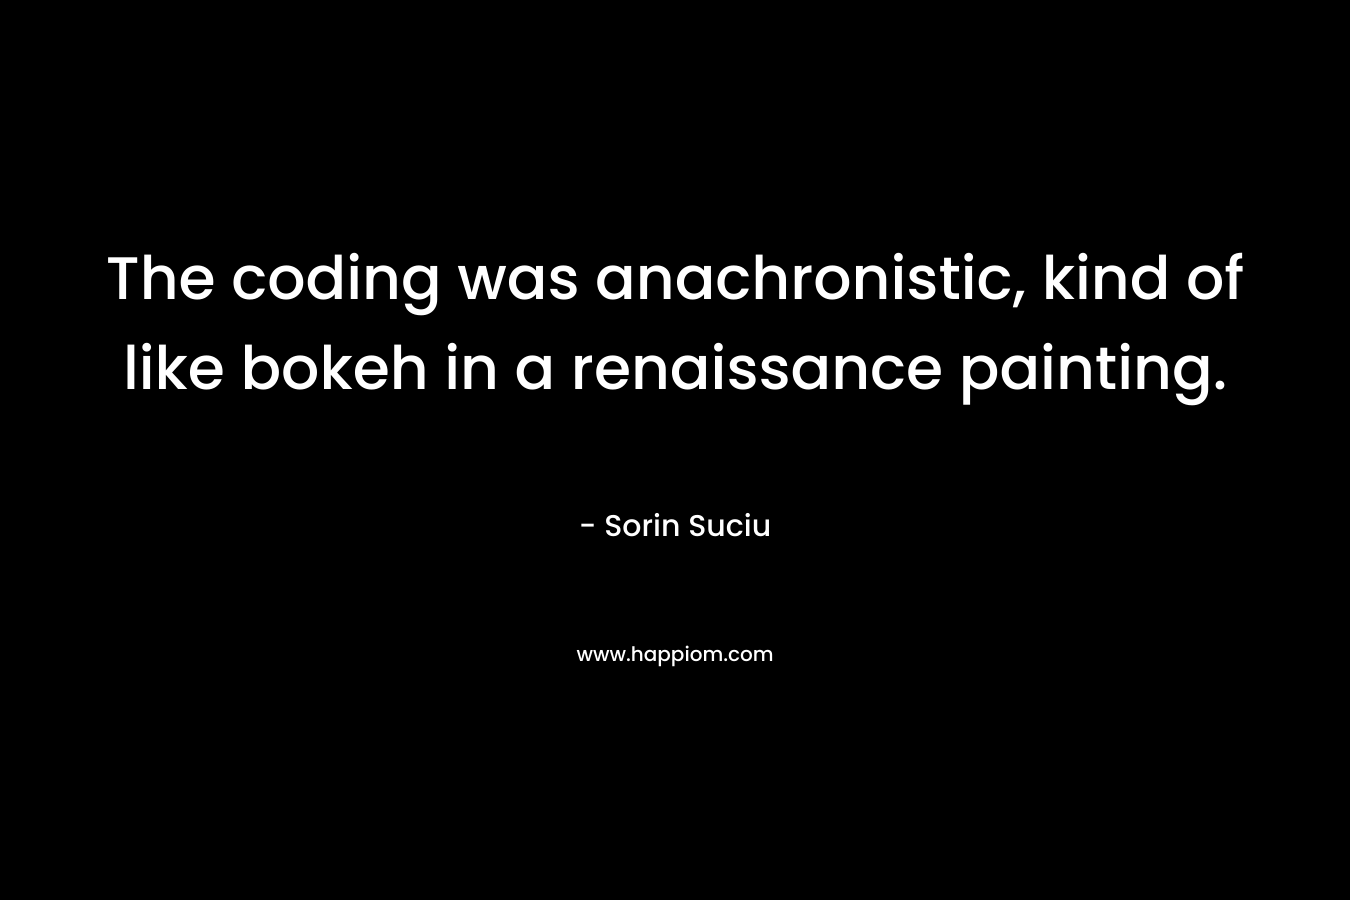 The coding was anachronistic, kind of like bokeh in a renaissance painting. – Sorin Suciu